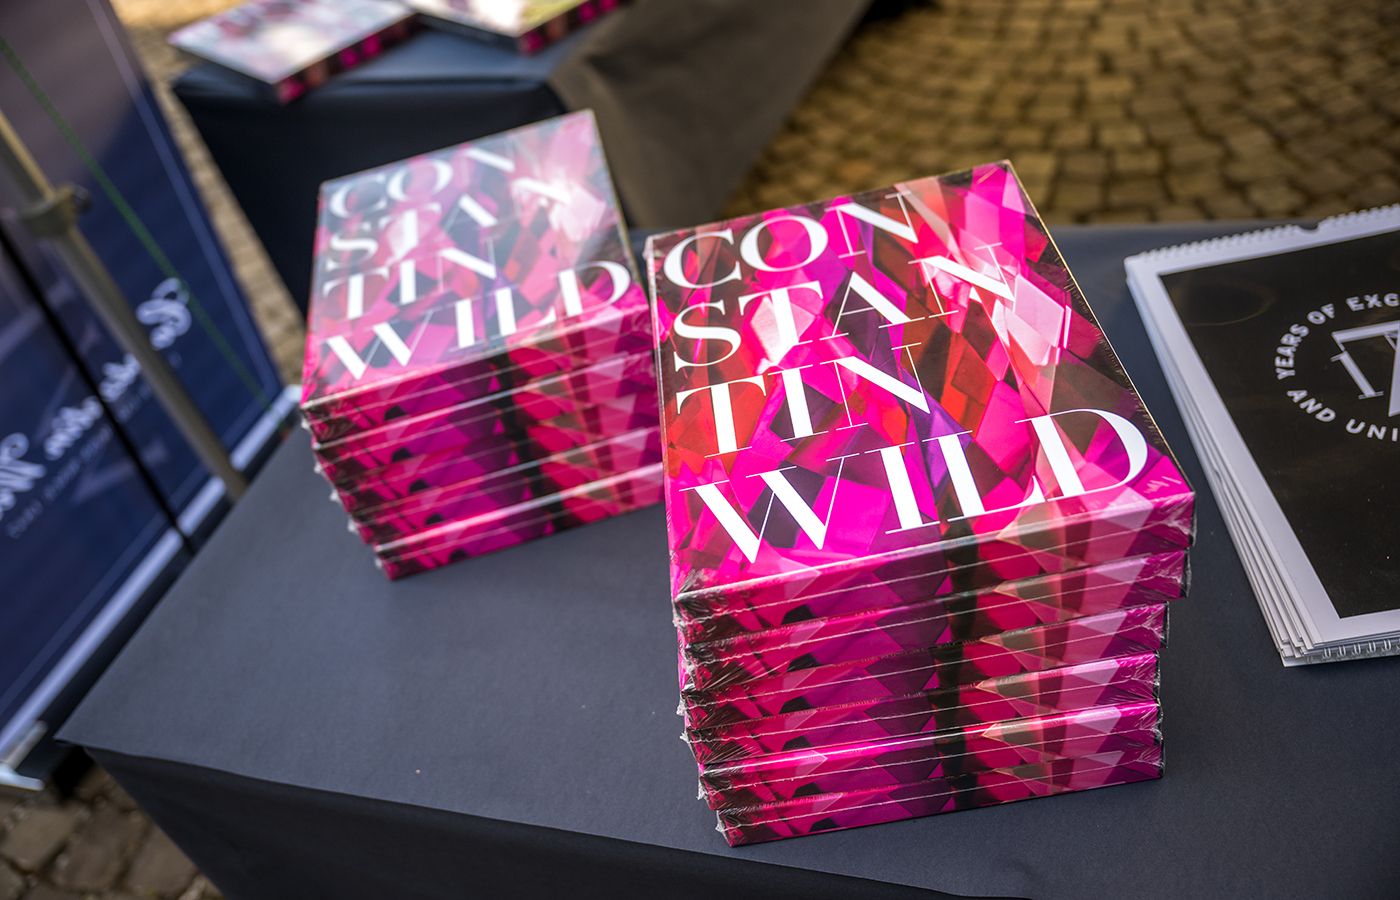 Copies of Constantin Wild's coffee table book that includes an introduction by Katerina Perez